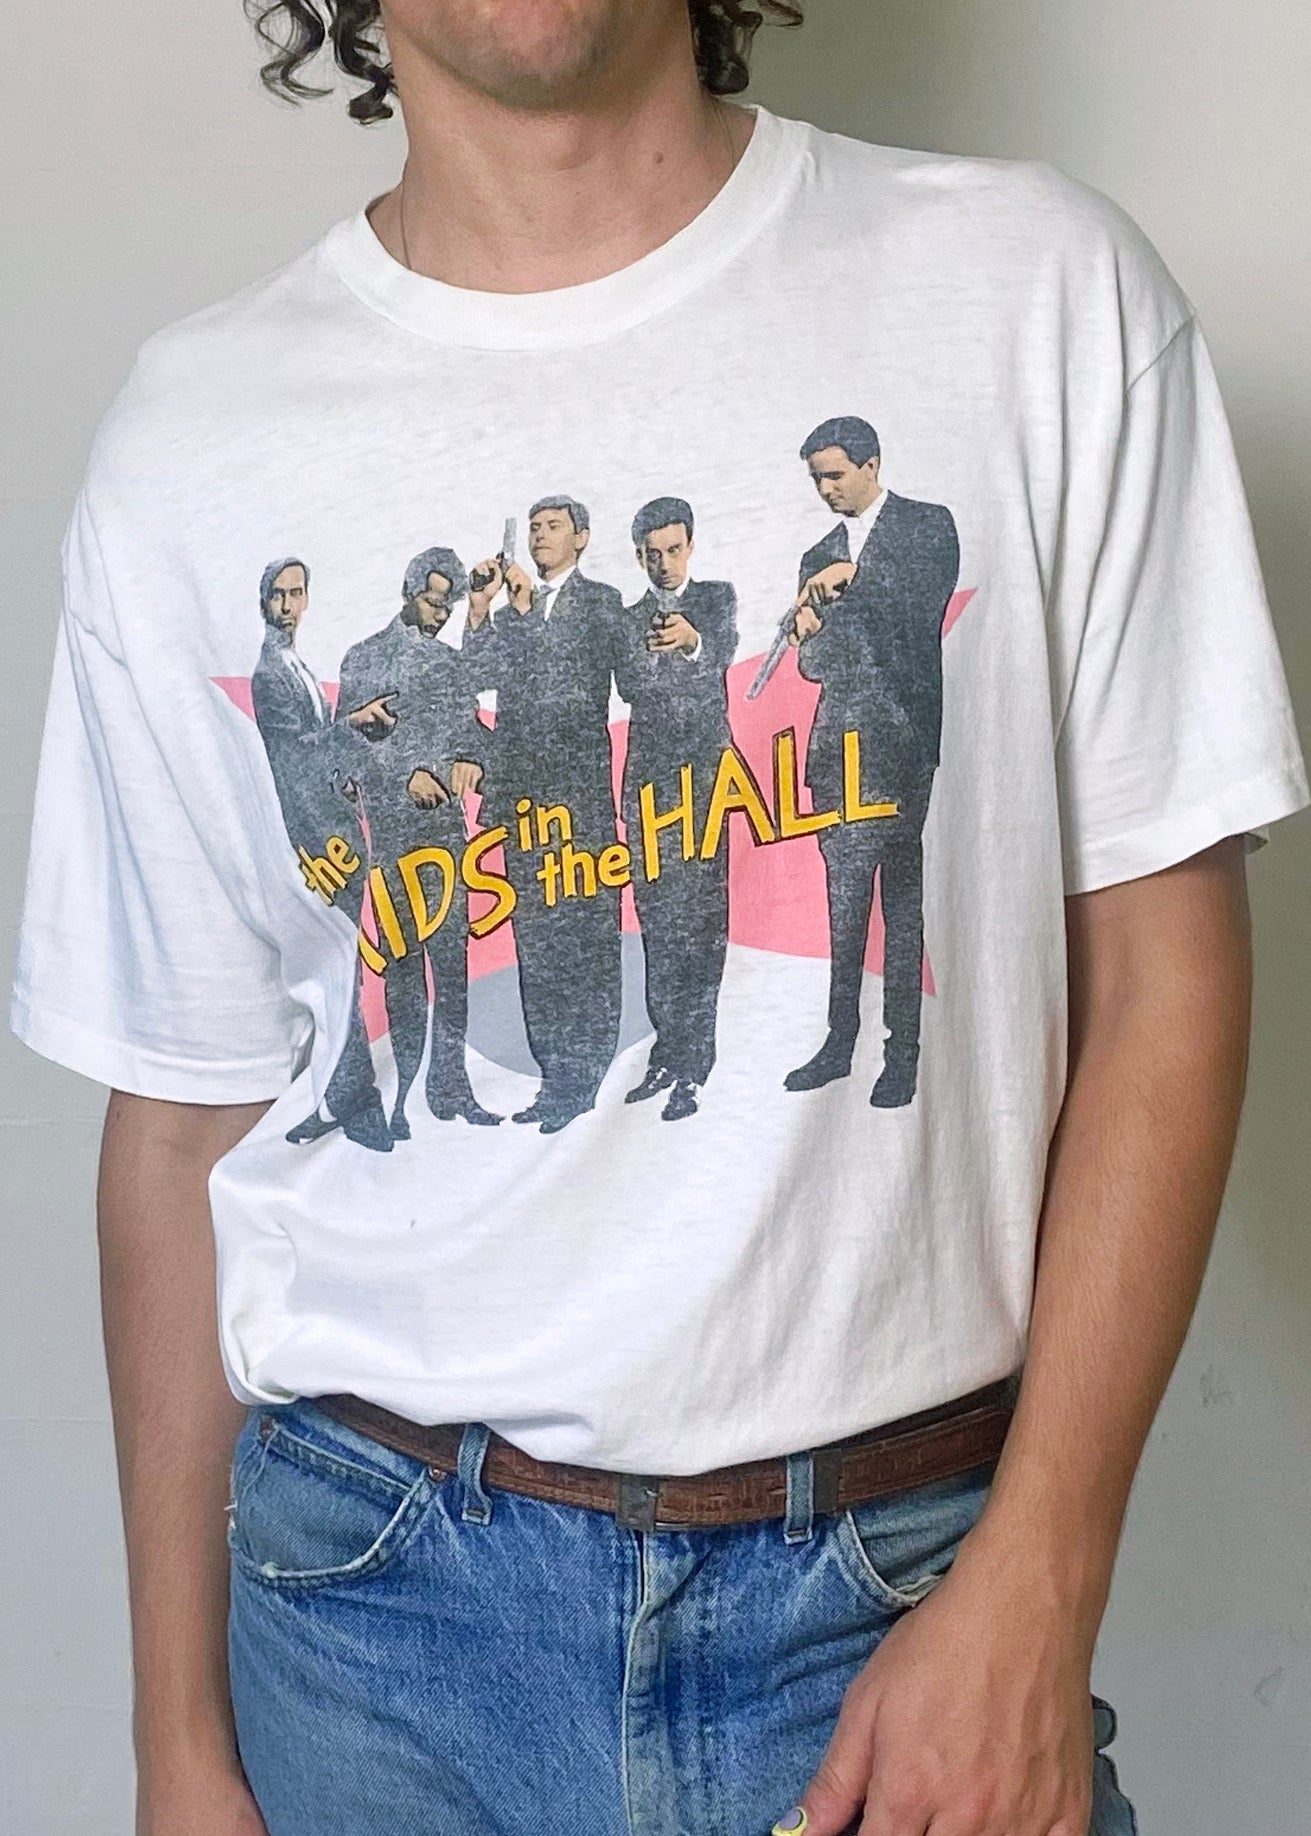 Kids in The Hall (c.1993)